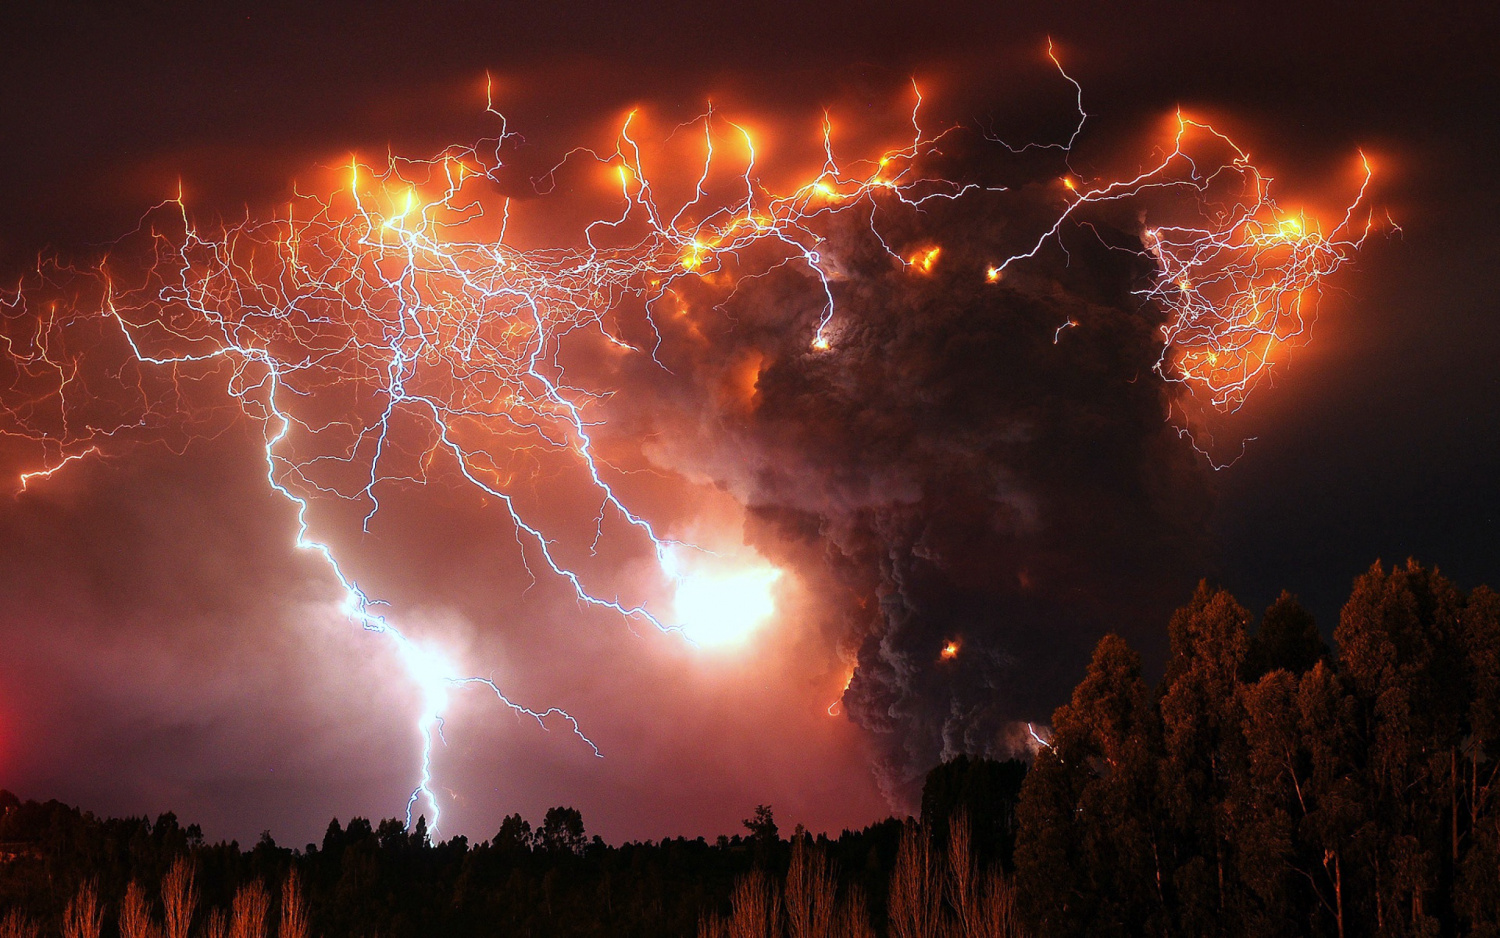 lightning, Chile, smoke, landscape, eruption, night, forest, nature, volcano, sky, trees, clouds Gallery HD Wallpaper